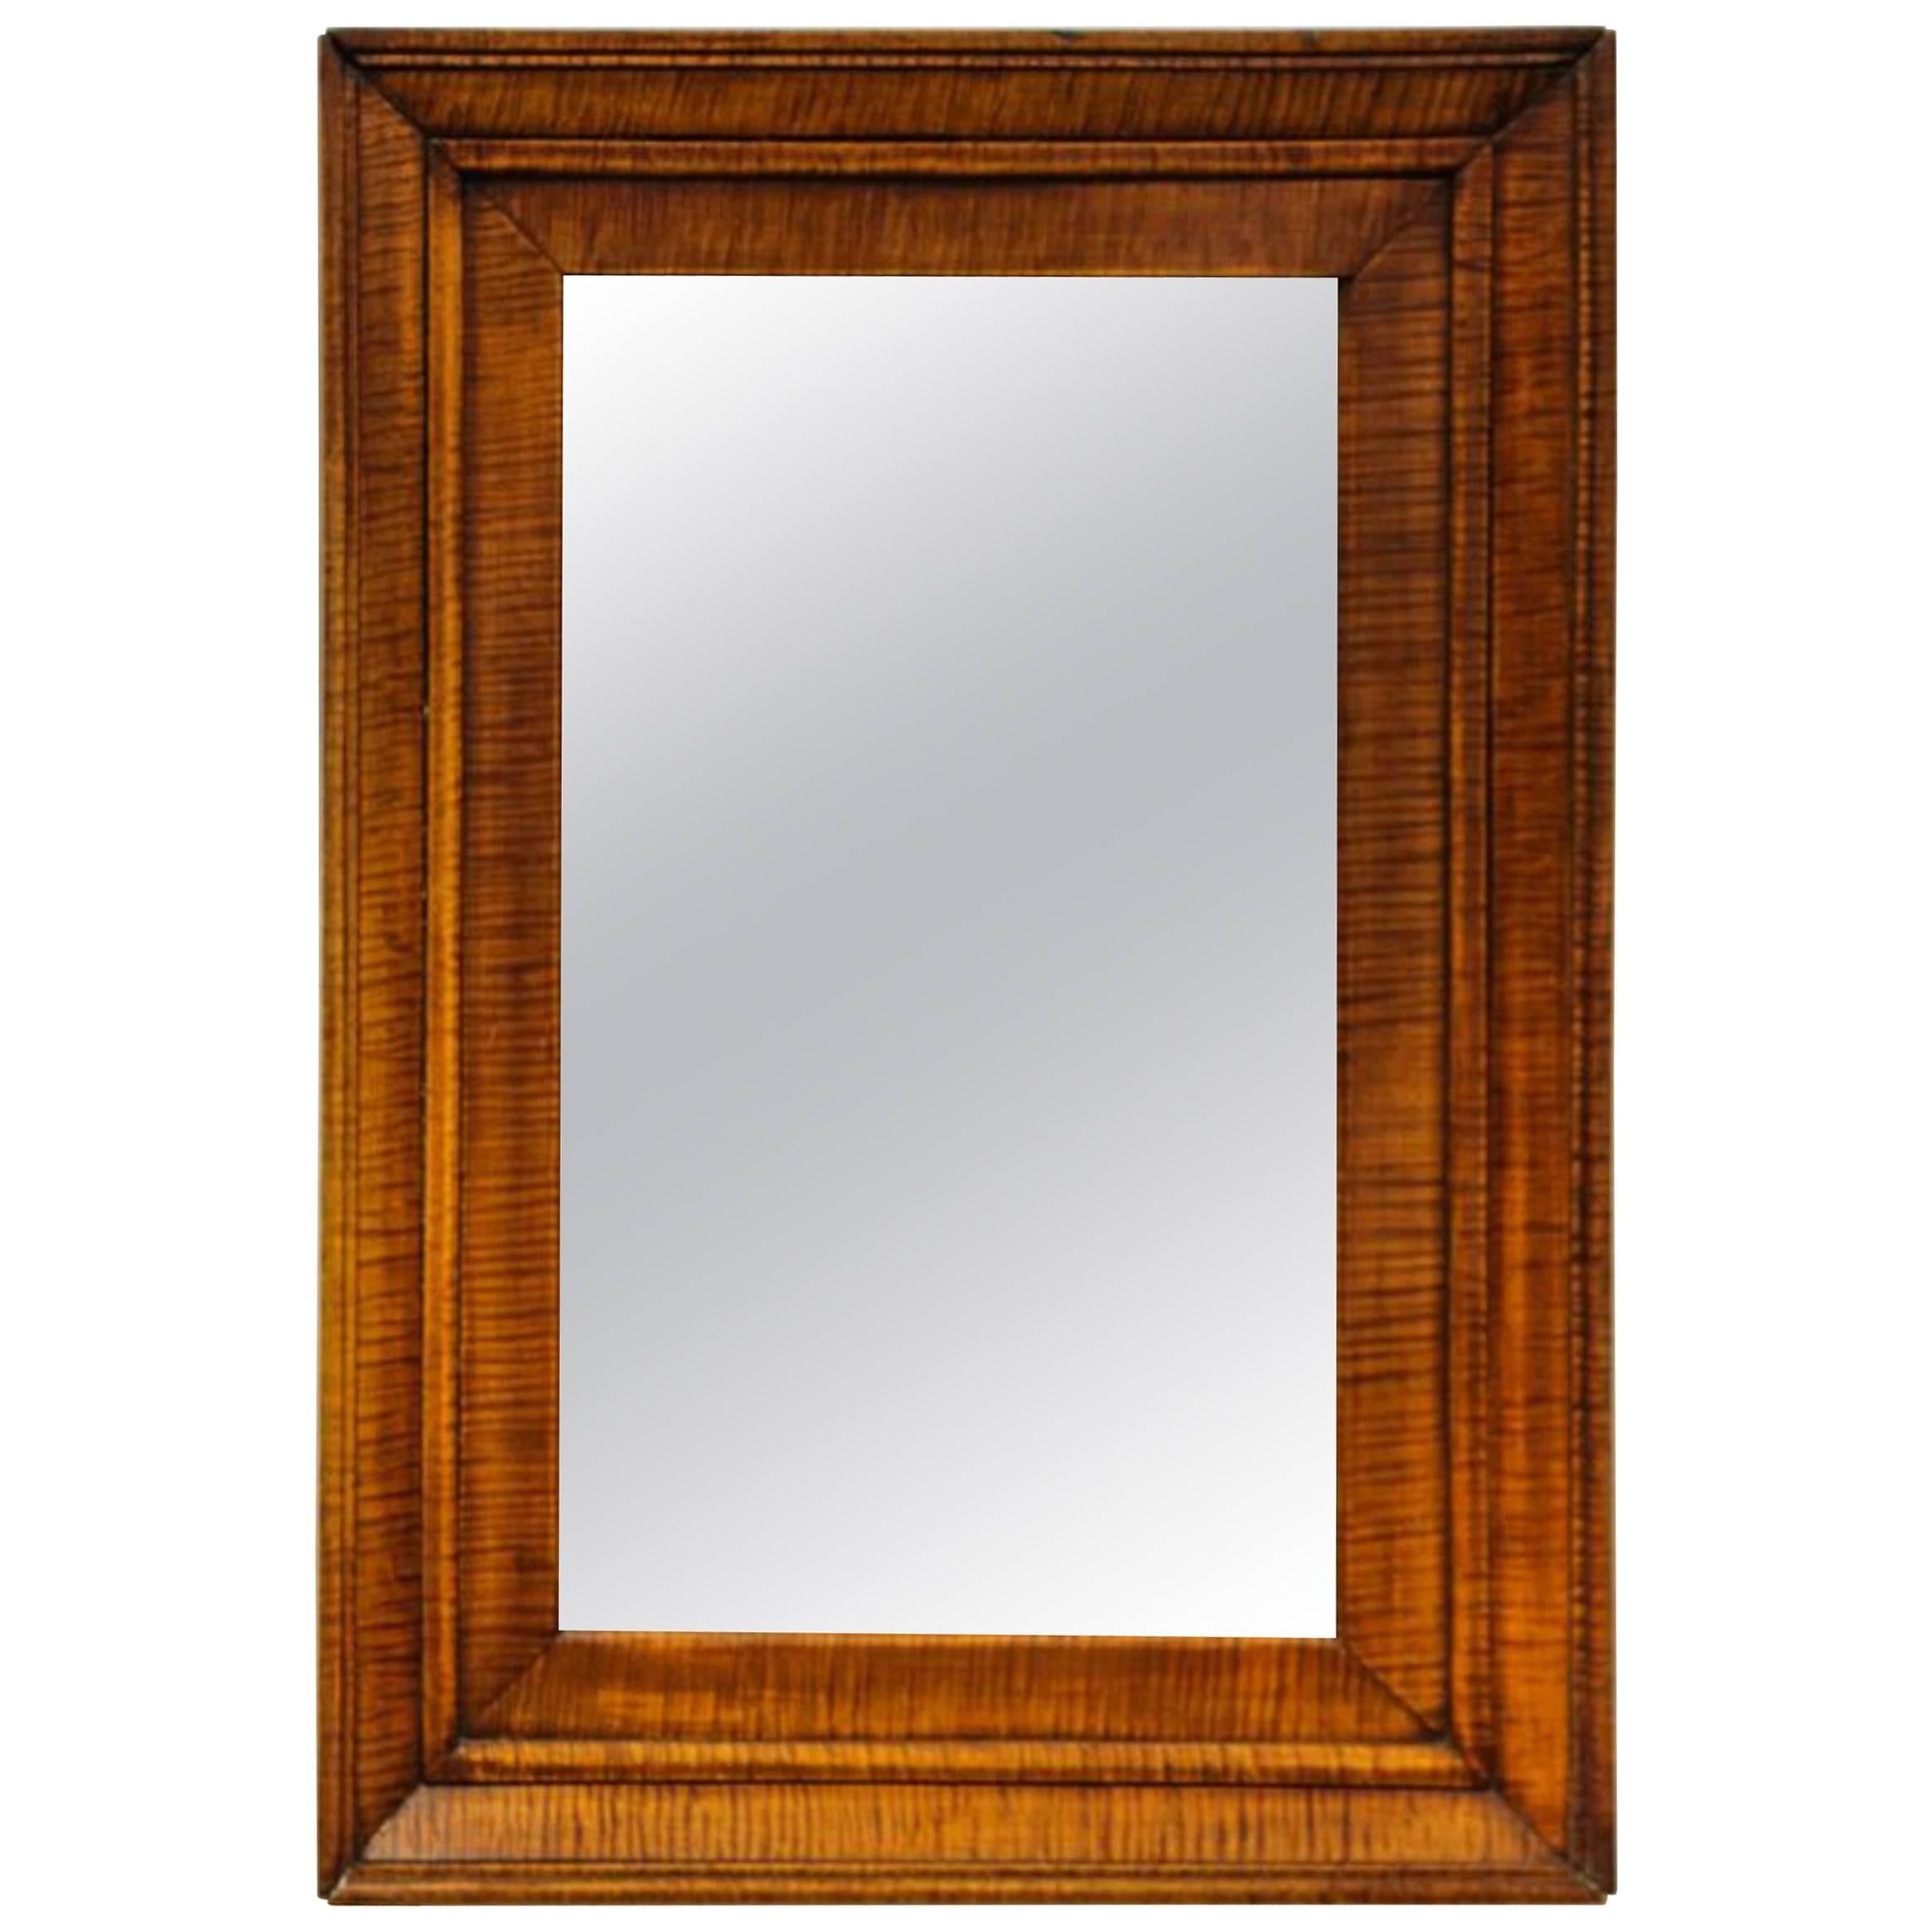 Handsome Early 19th Century American Tiger Maple Framed Mirror